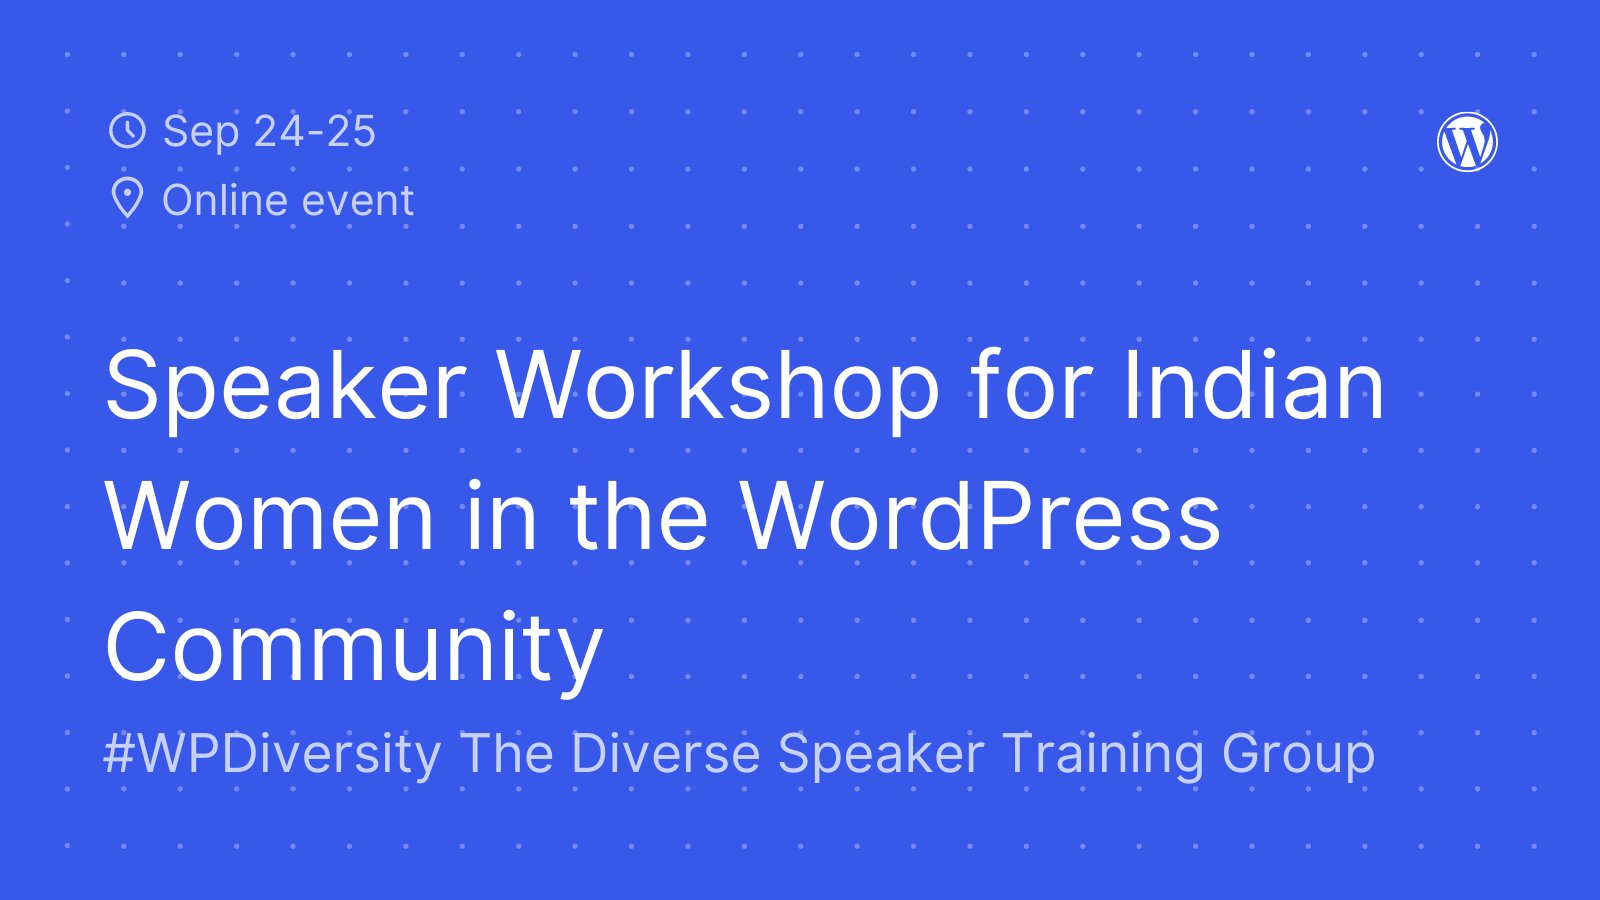 Blue background with white dots and text, "September 24-25. Online event. Speaker Workshop for Indian Women in the WordPress Community. #WPDiversity The Diverse Speaker Training Group"